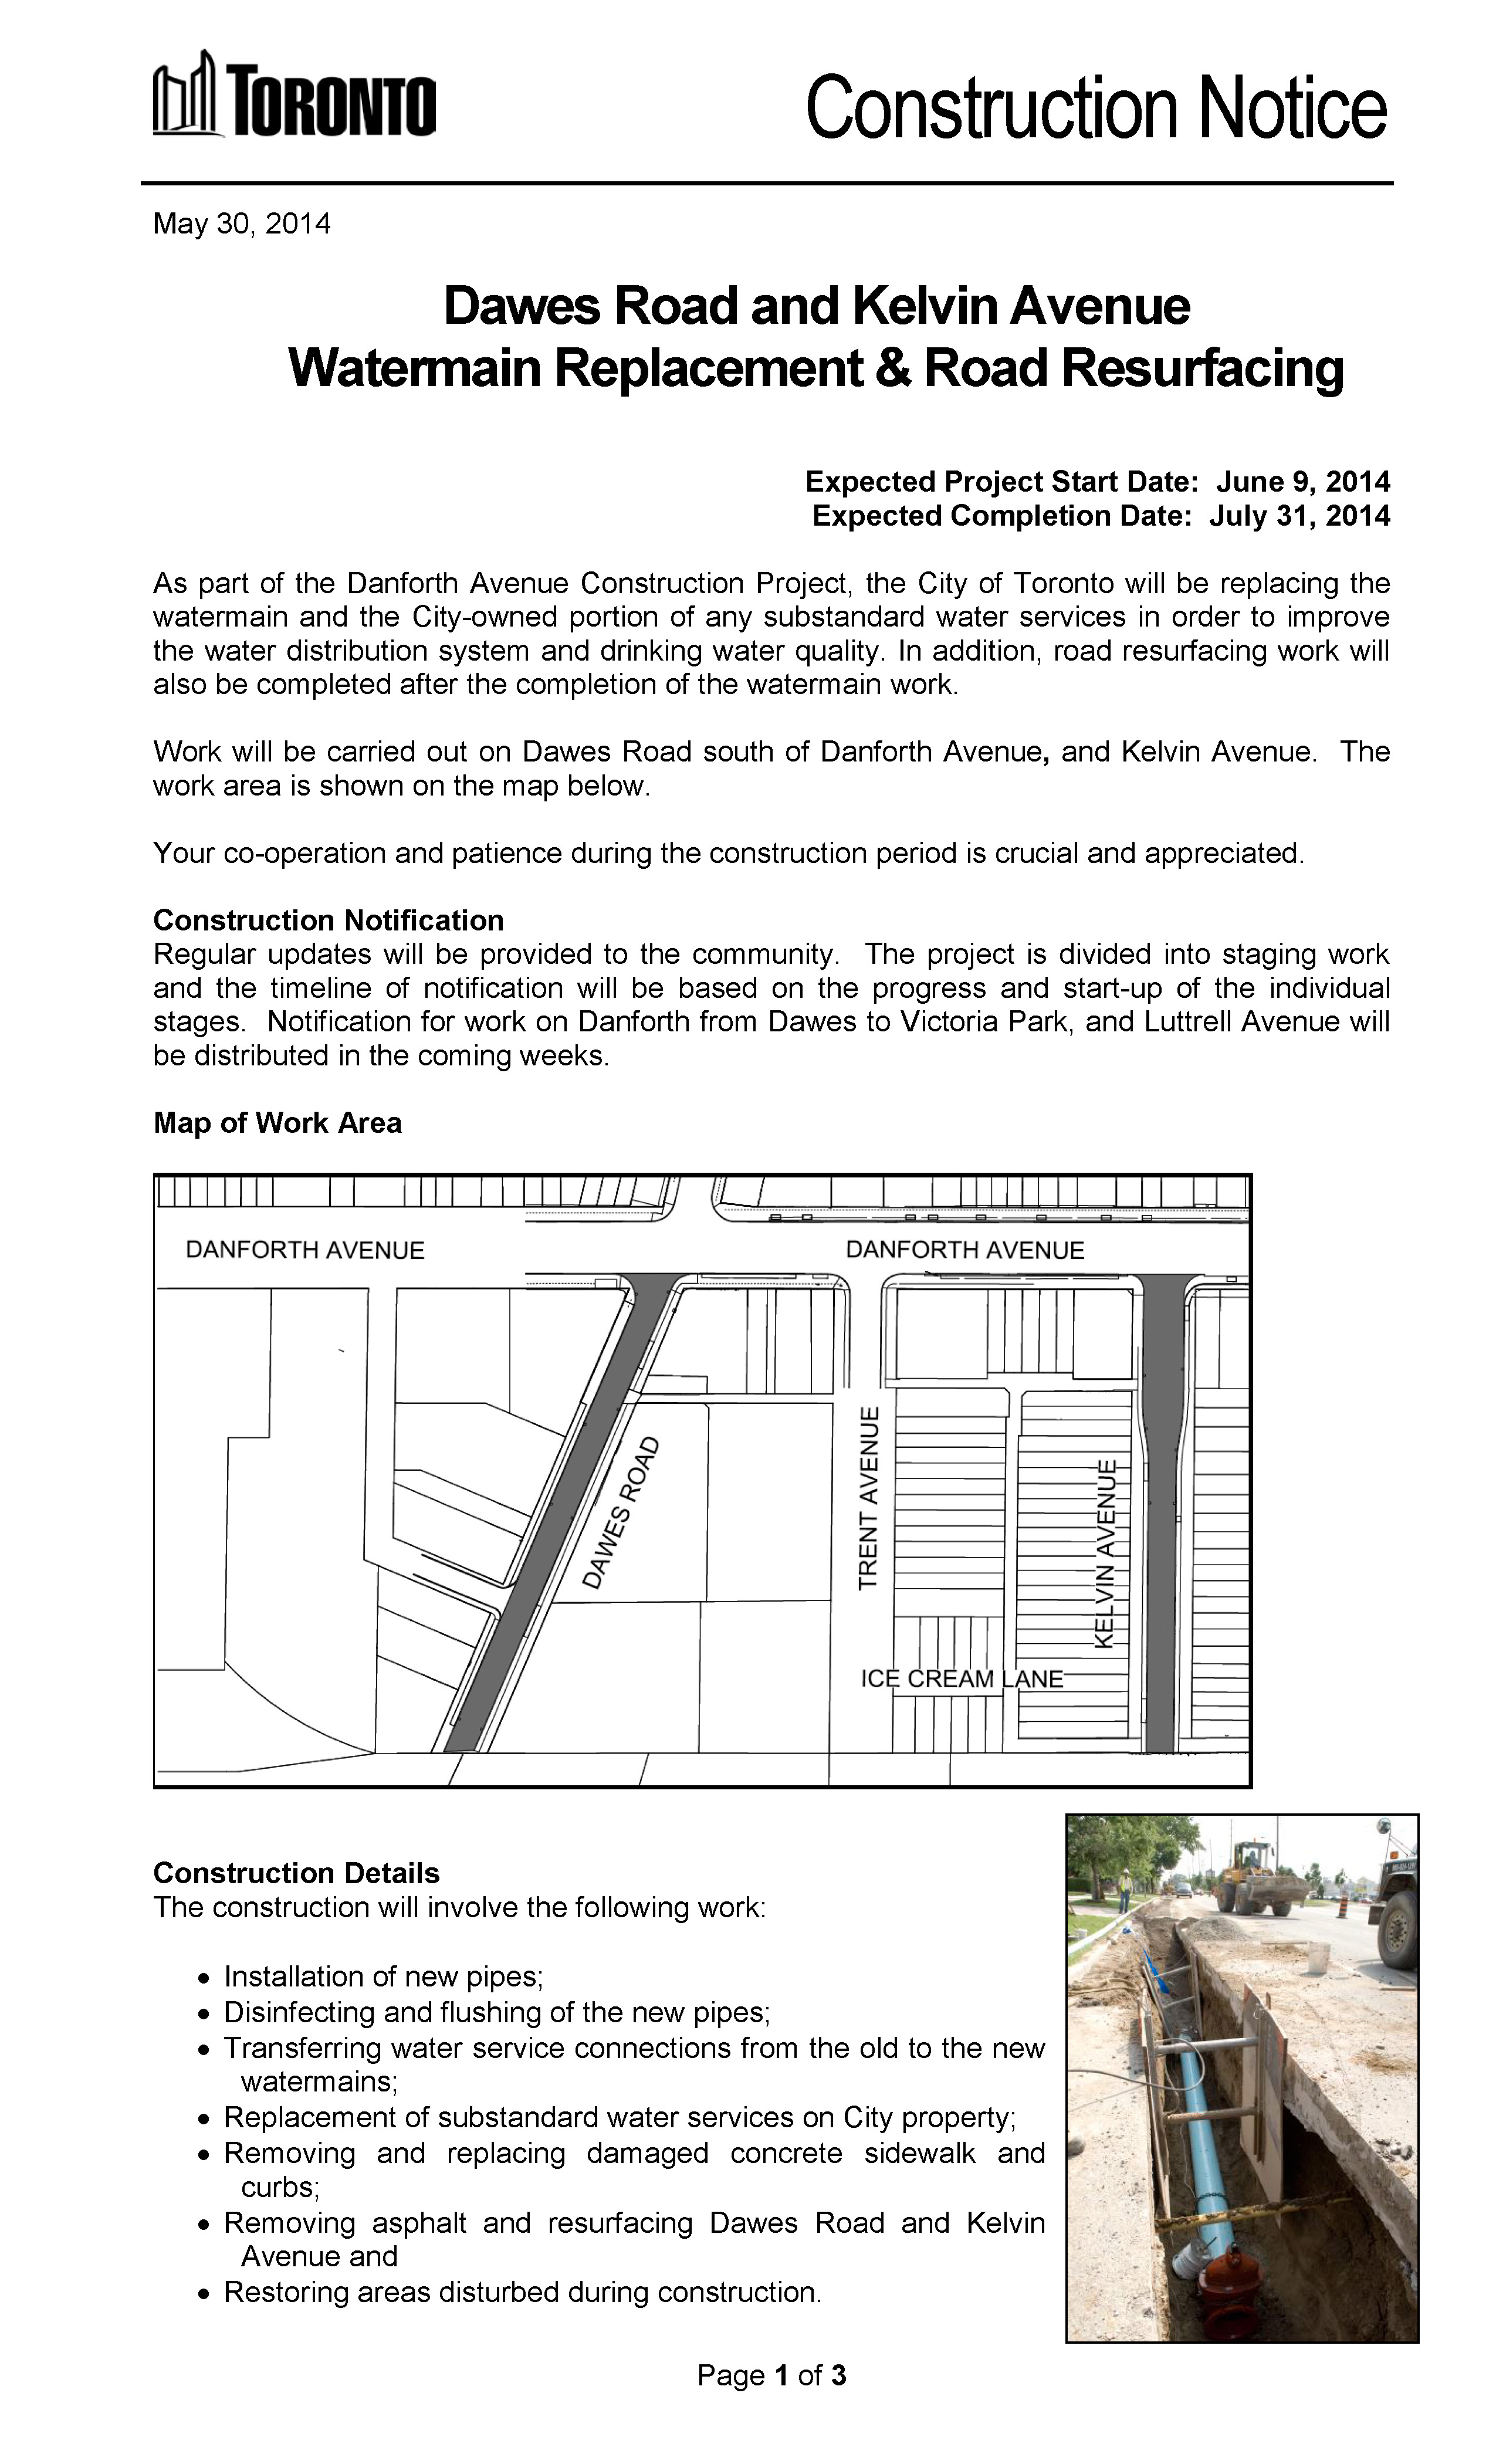 Construction Notice Dawes Road and Kelvin Avenue Watermain Replacement & Road resurfacing_Page_1